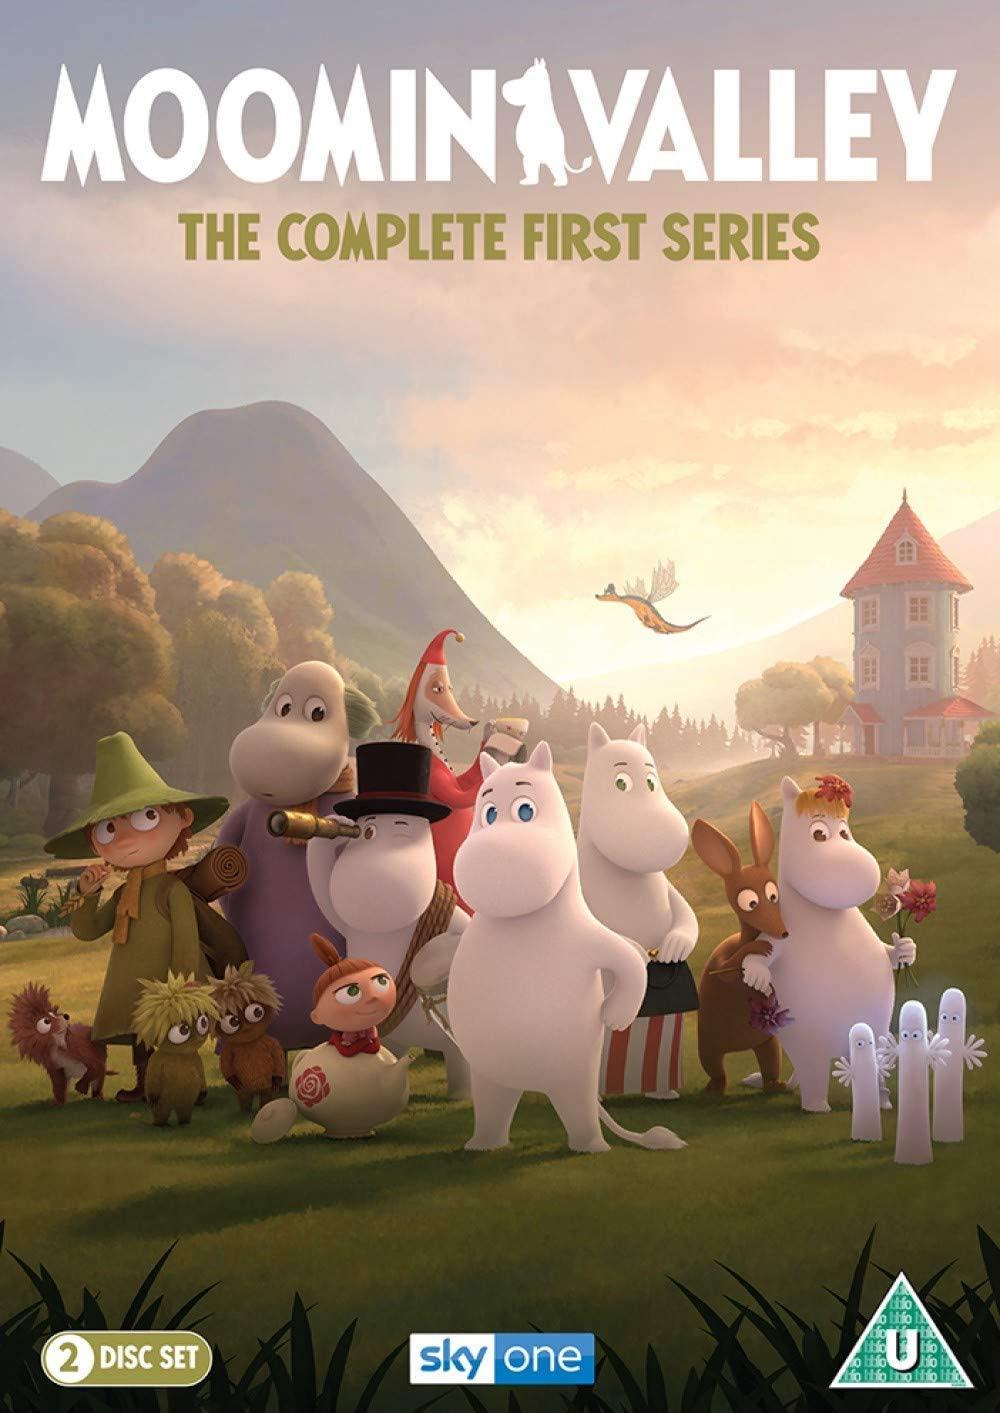 MOOMINVALLEY: THE COMPLETE FIRST SERIES 2DVD